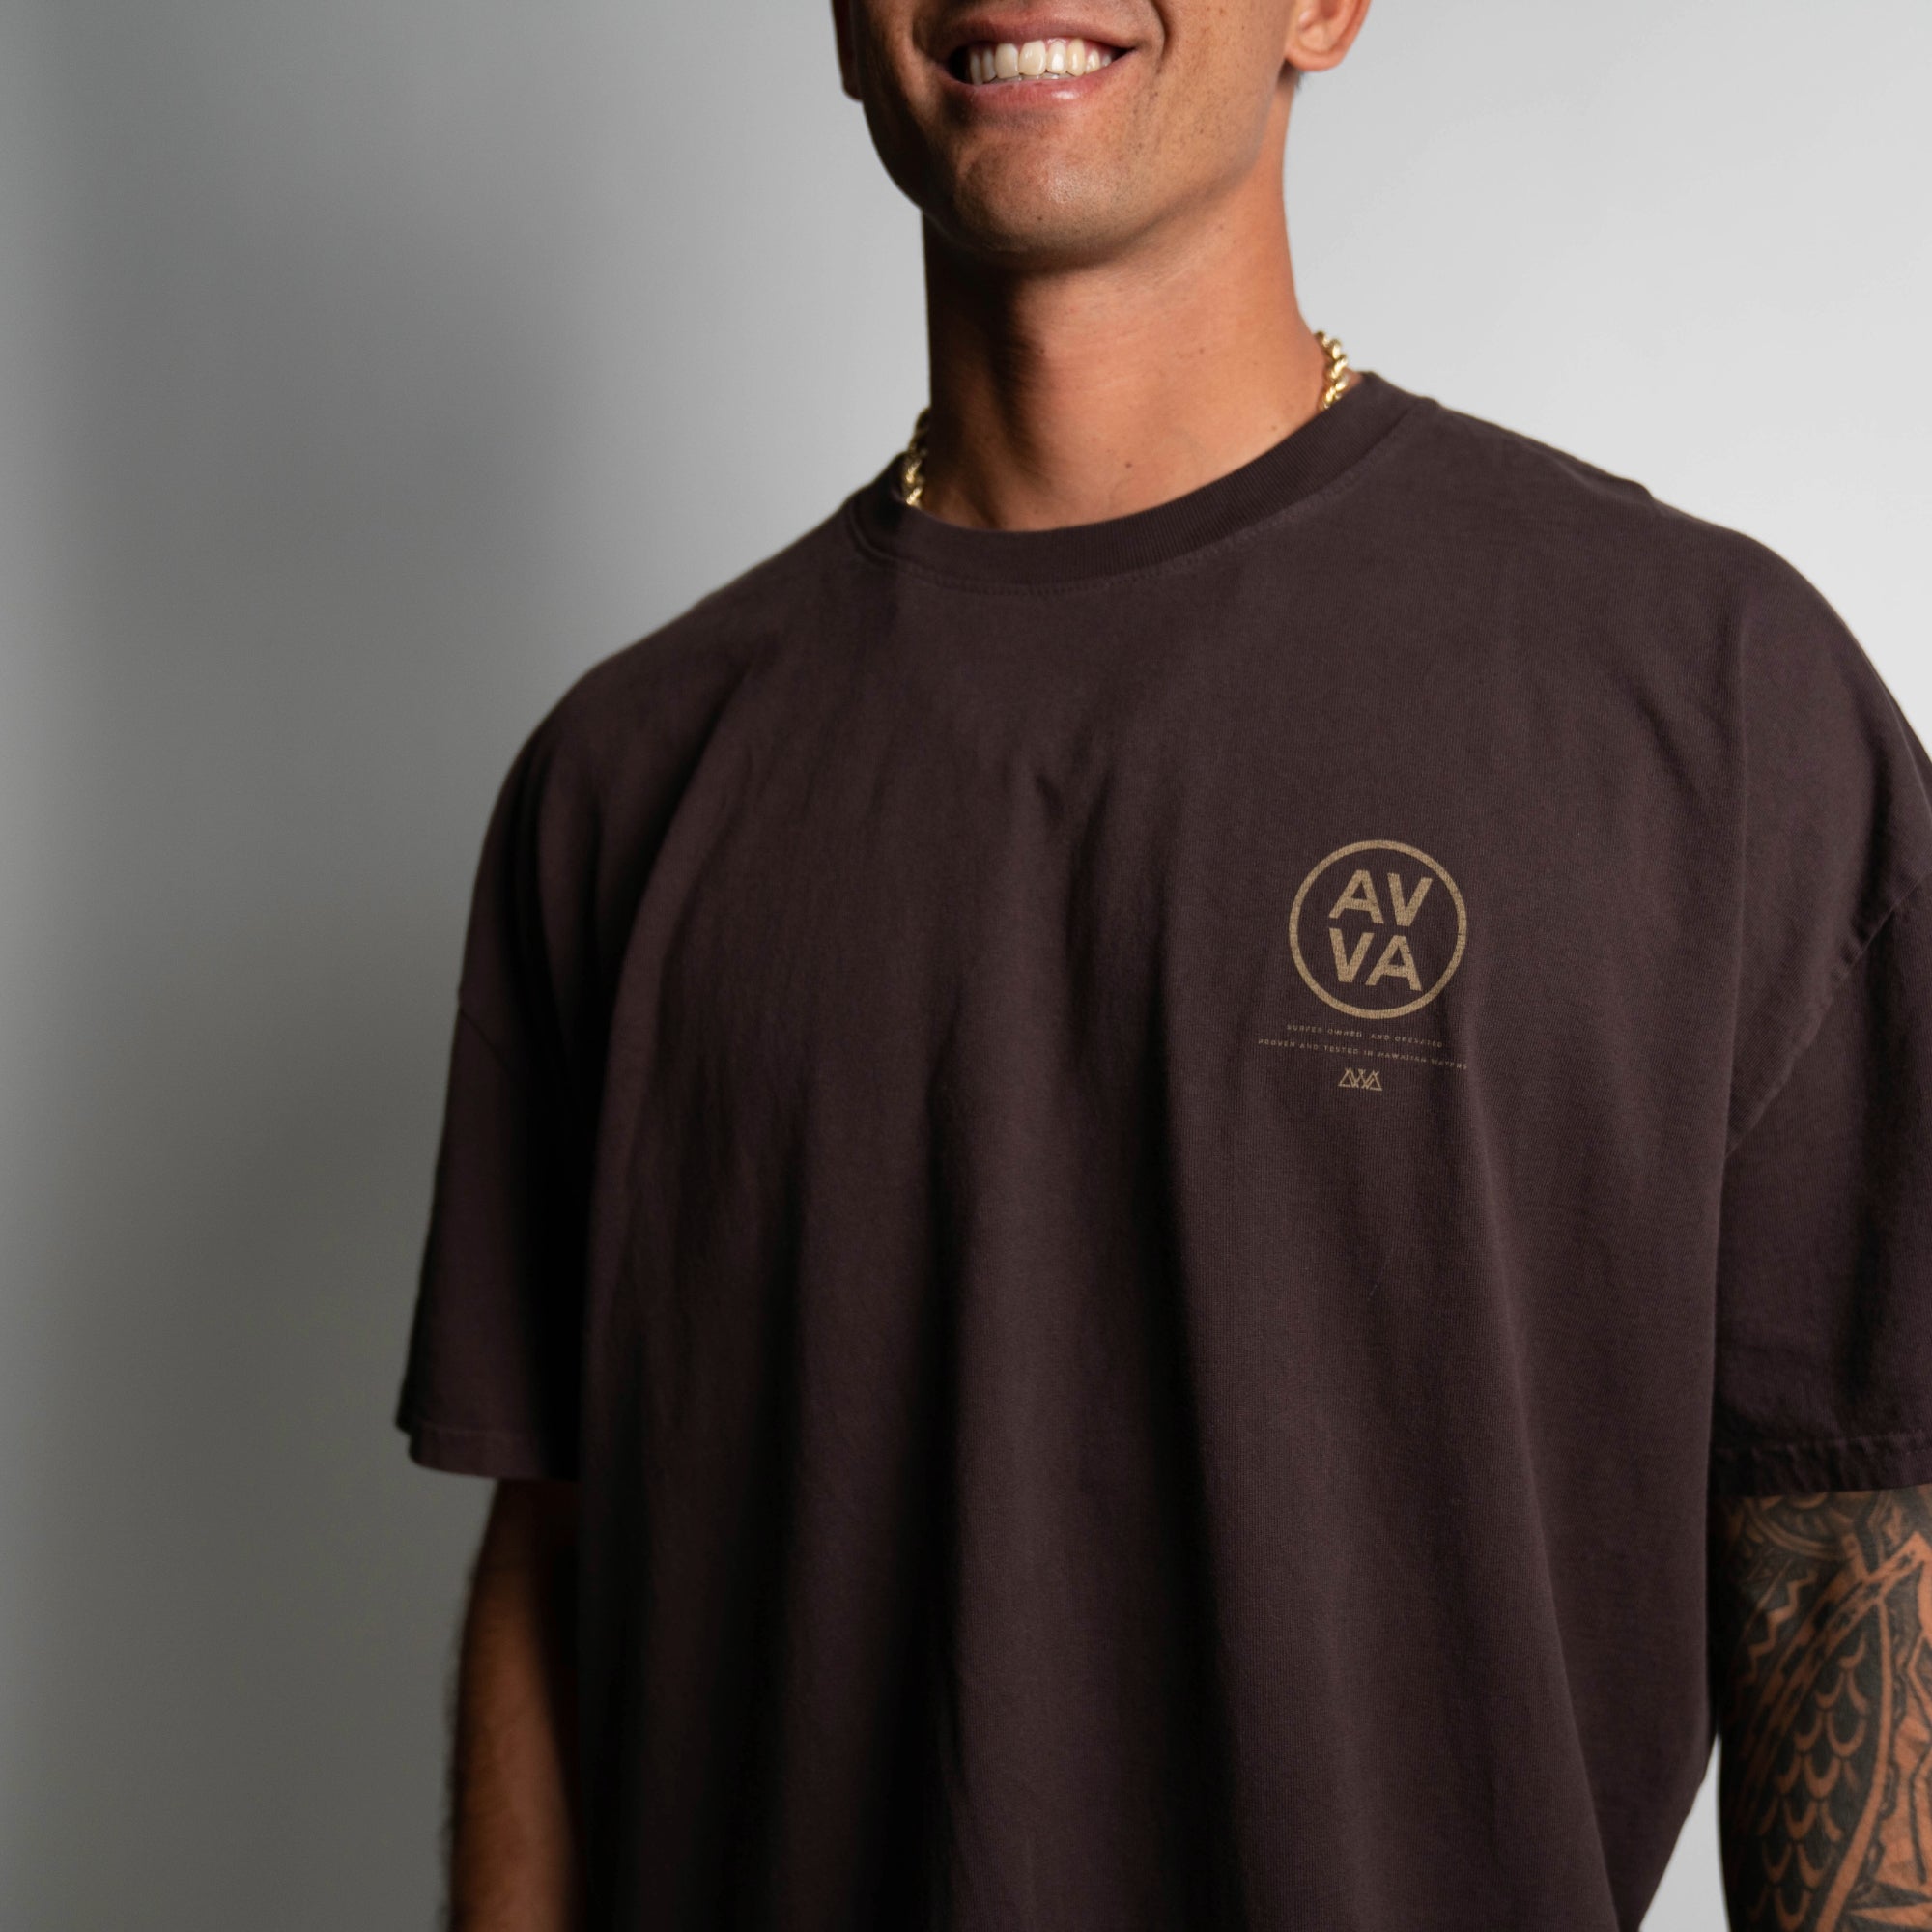 FRONT VIEW OF BROWN HEAVYWEIGHT CREED TEE ON MODEL LOOKING FORWARD. HIGHLIGHTING TOP RIGHT AVVA LOGO.